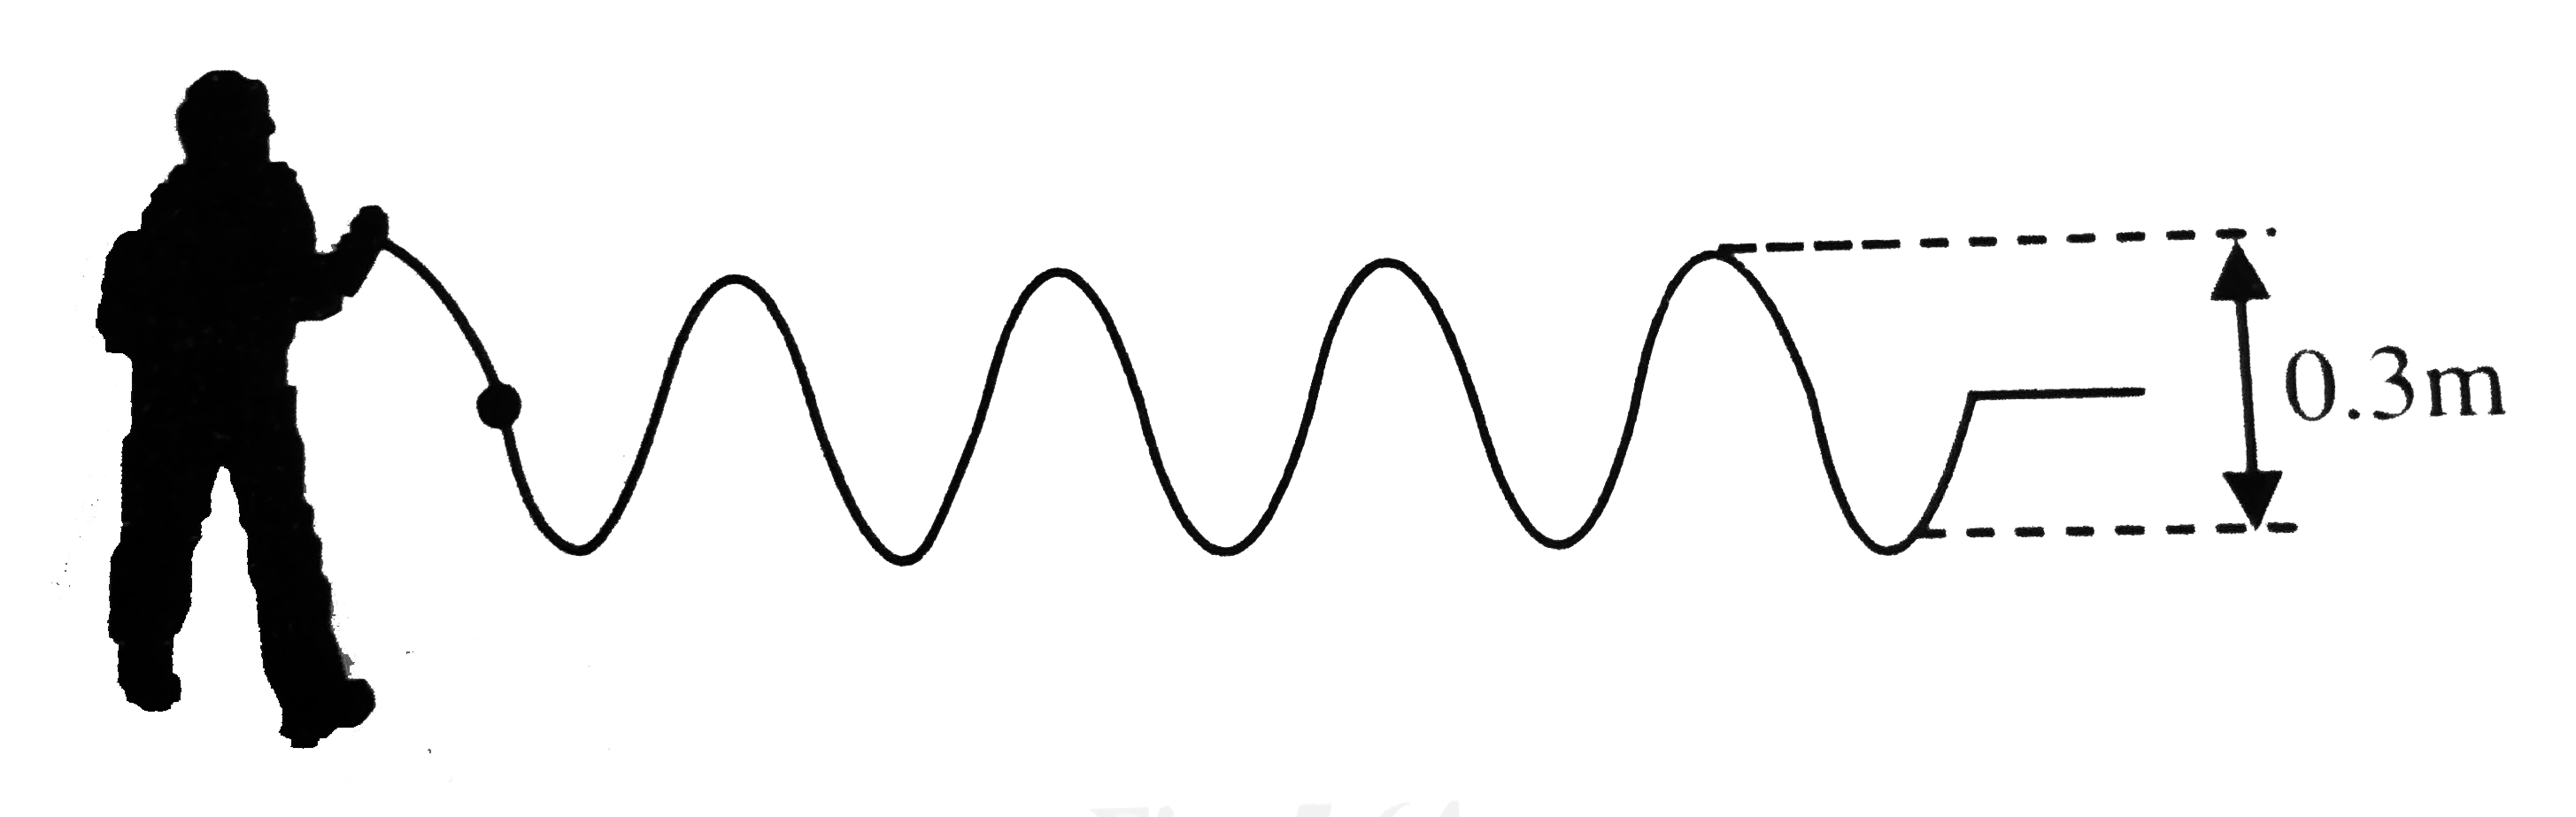 figure. Shows a student setting up wave wave on a long stretched string. The student's hand makes one complete up and down movement in 0.4 s and in each up and down movement the hand moves by a height of 0.3 m. The wavelength of the  waves on the string is 0.8 m.      The amplitude of the wave is